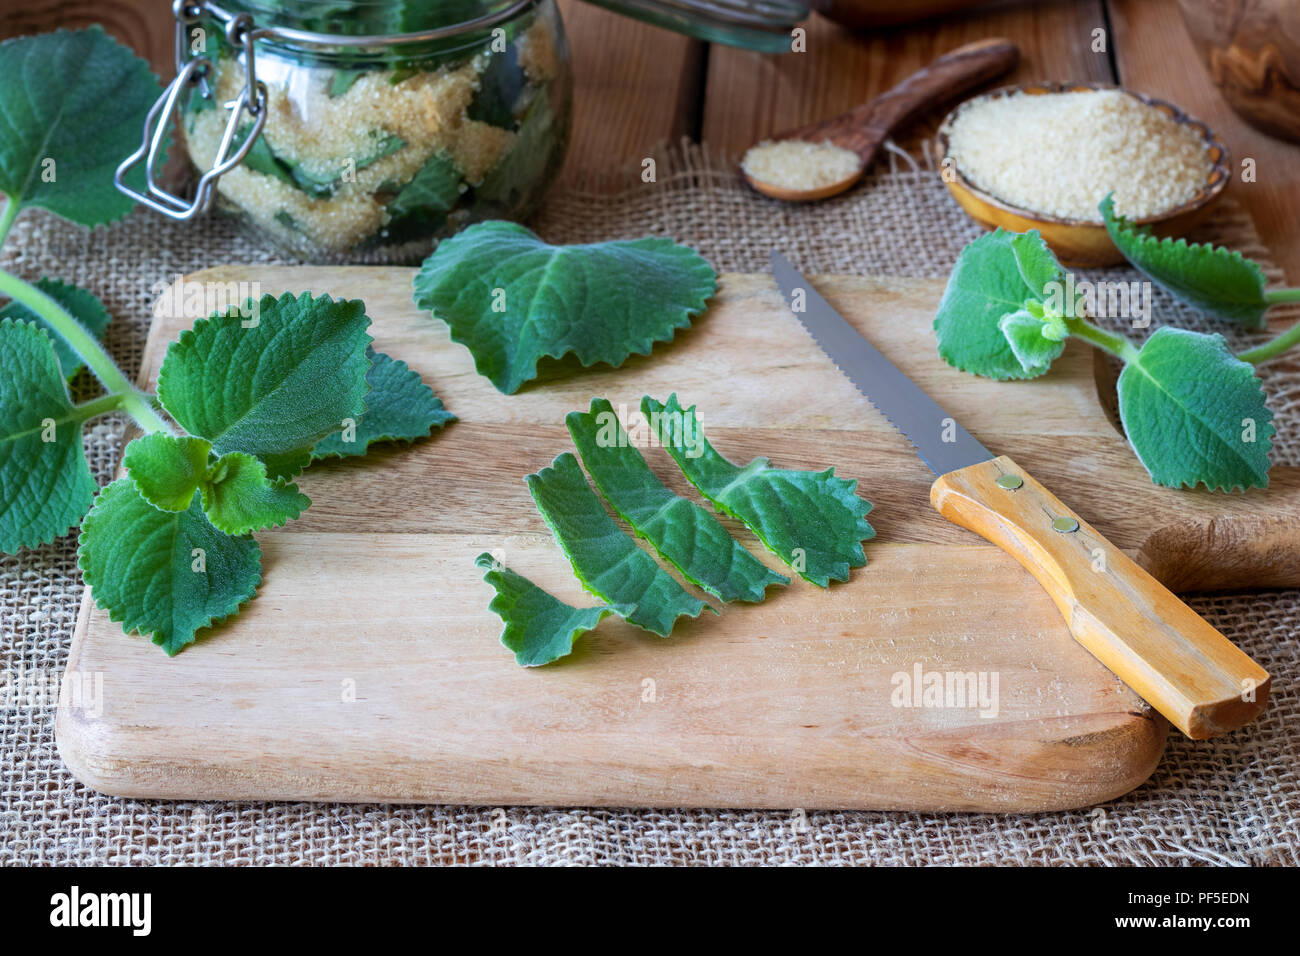 Preparation of a herbal syrup against common cold from silver spurflower and cane sugar Stock Photo